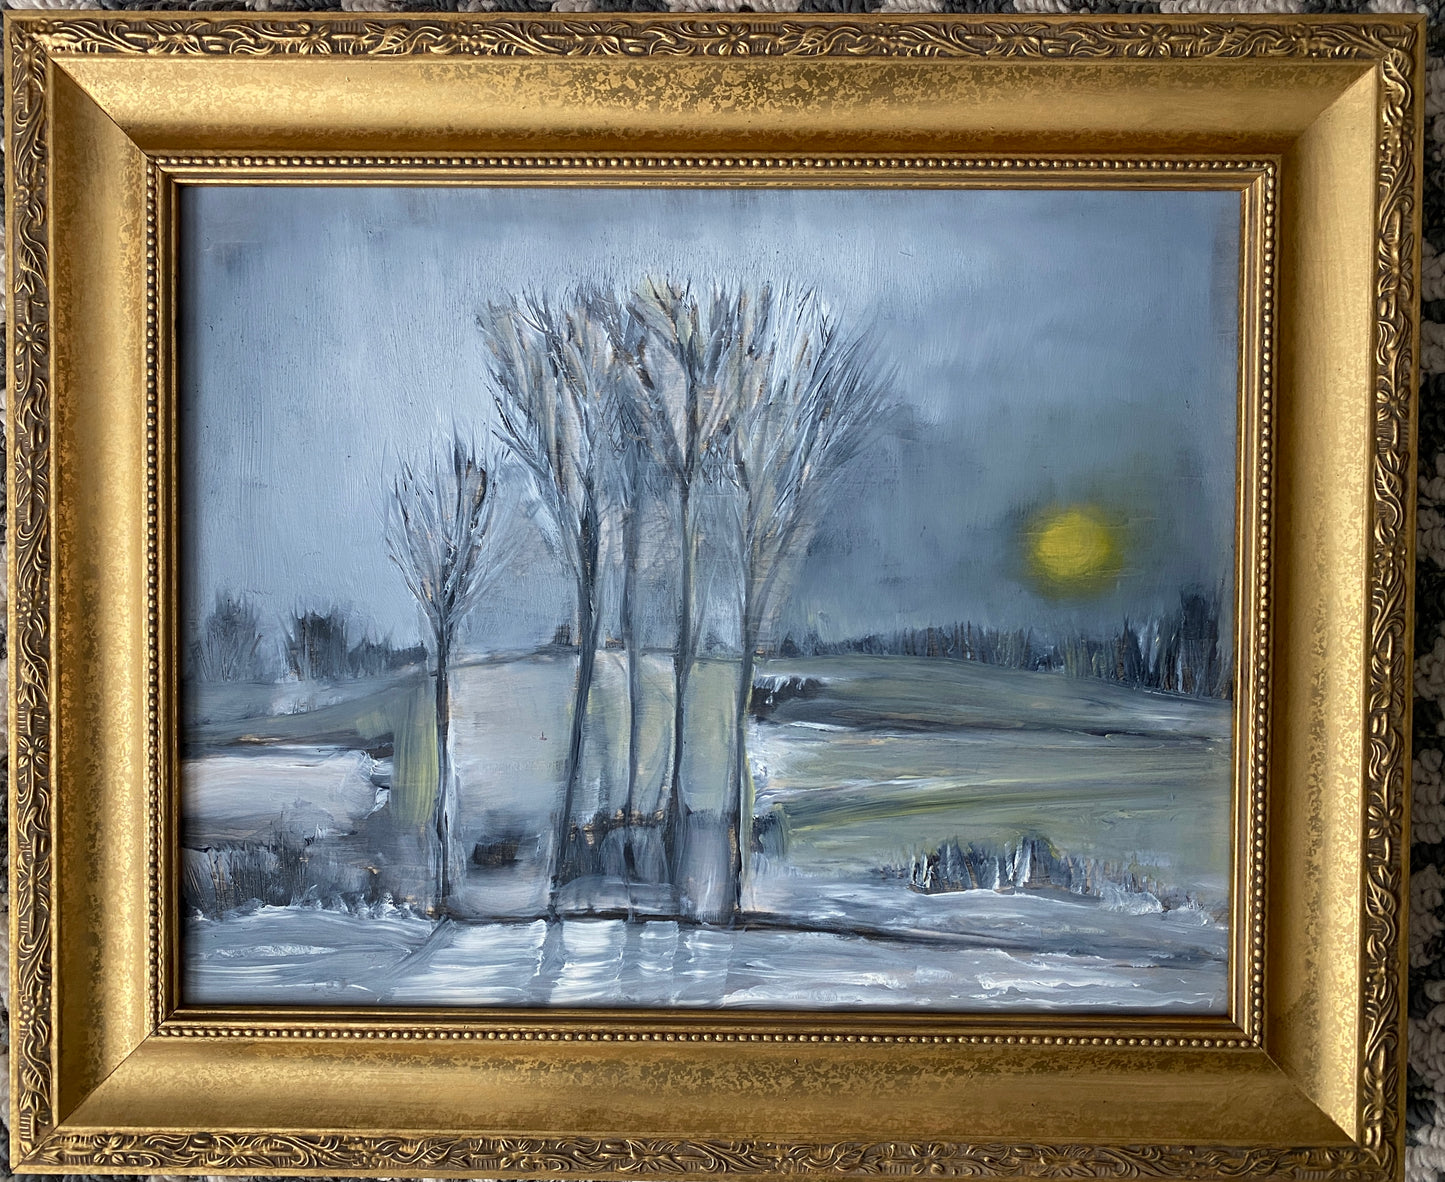 AUCTION BID NOW! 1963 Original oil winter day farm Landscape painting ornate frame, impressionism, signed by the artist